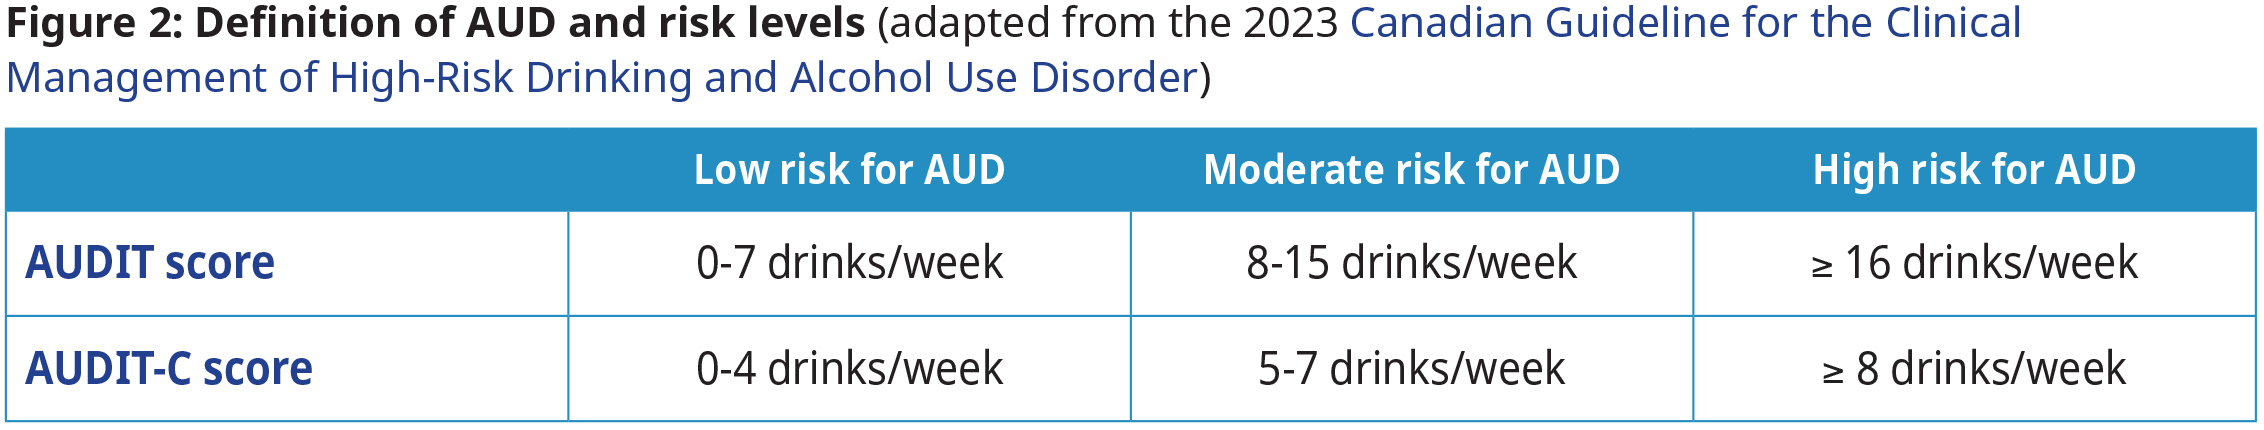 Definition of AUD and risk levels